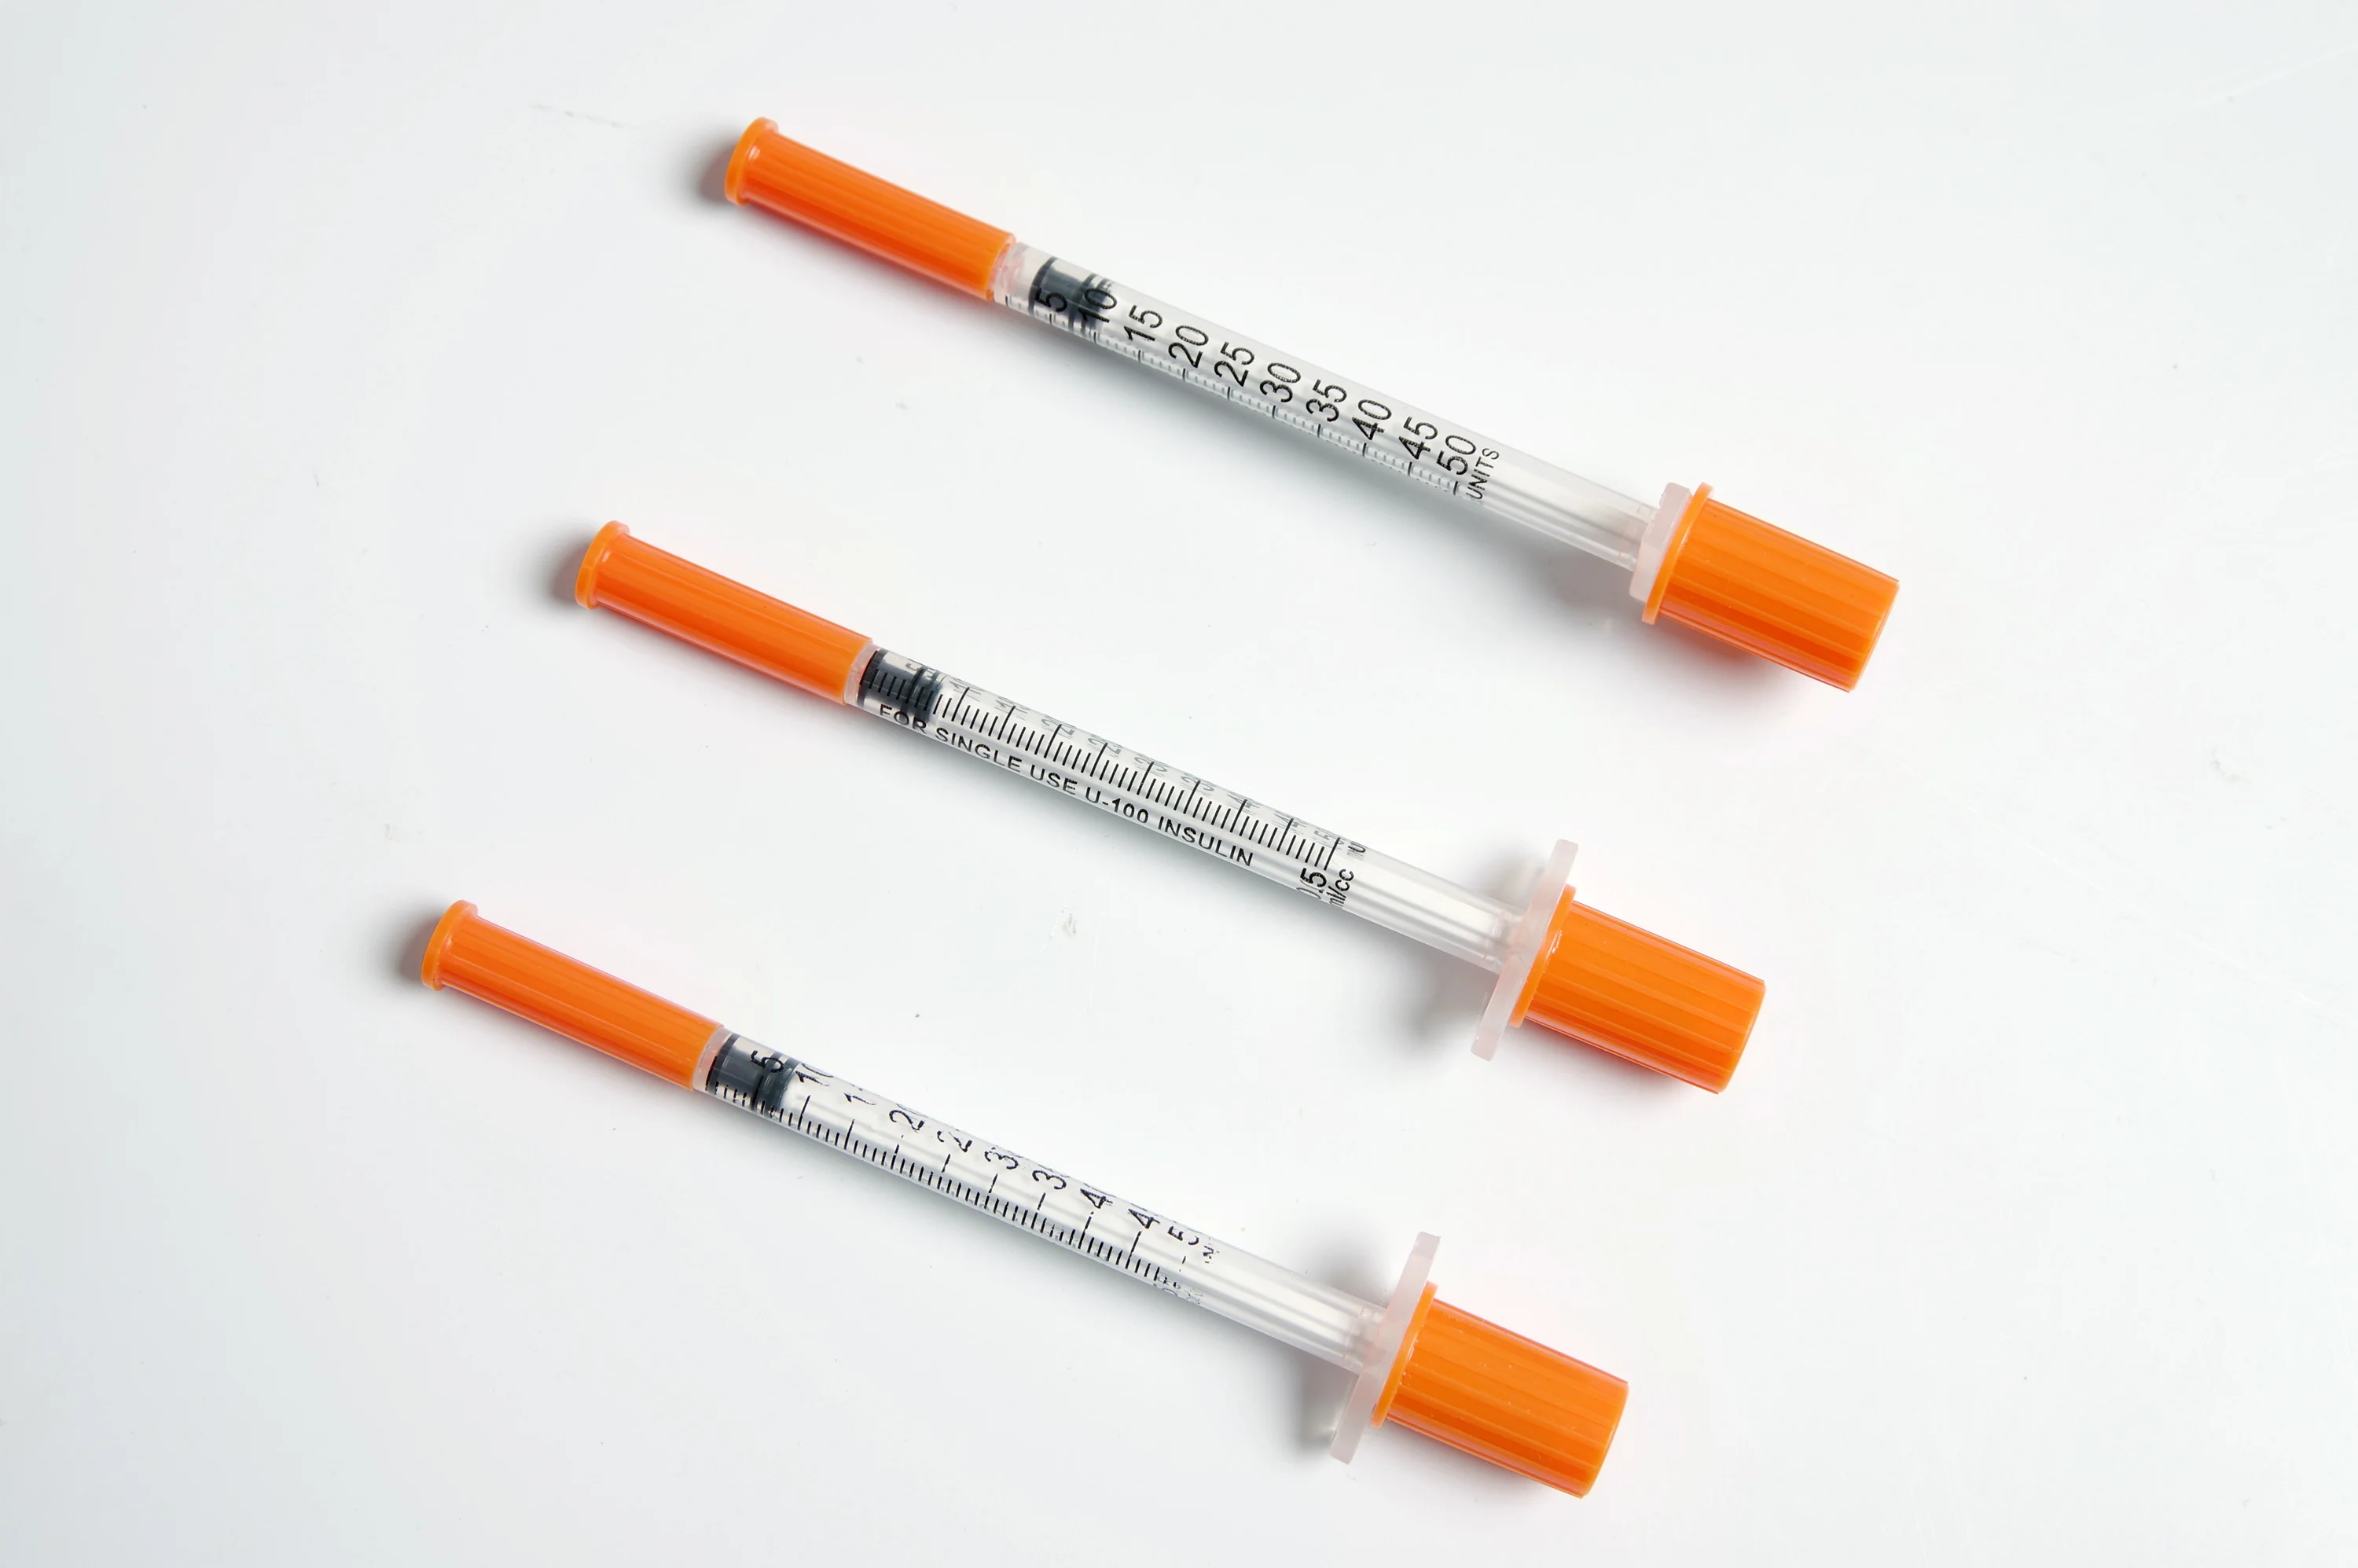 0.3ml*0.5ml*1mlDisposable Plastic Syringes Sterile Individually Packed Syringes for Farm Pets Lab Supplies 3ml luer lock syringes 21g 38mm syringe and needle injection tool disposable sterile individually packed